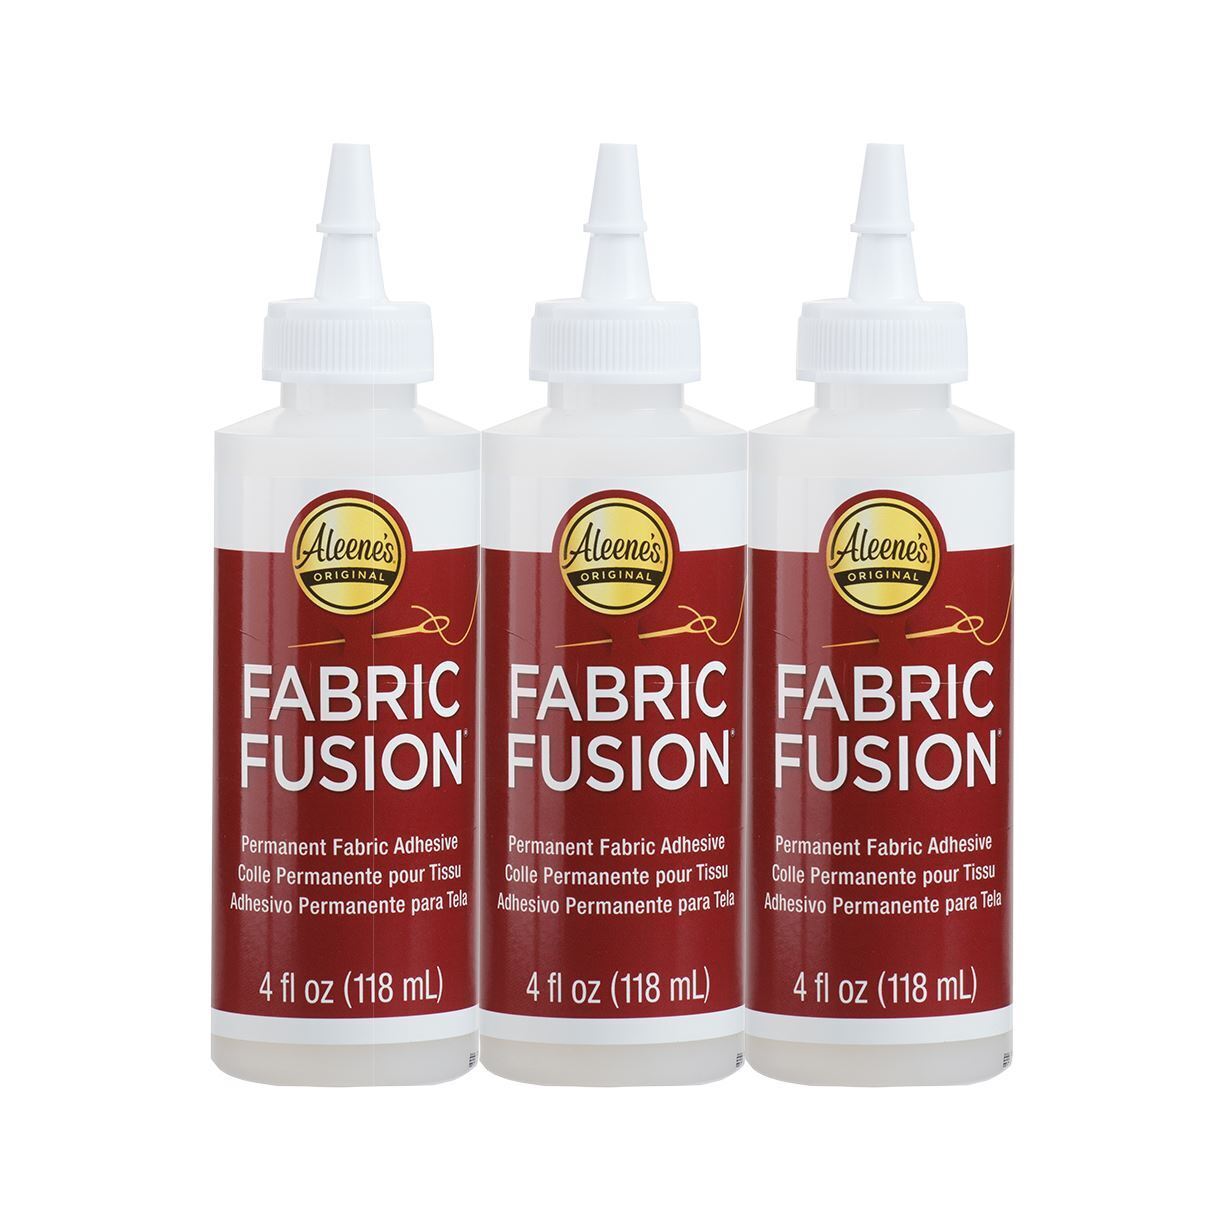 Aleene's Fabric Fusion Permanent Adhesive Dual Ended Pen-1.6oz - 3 Pack